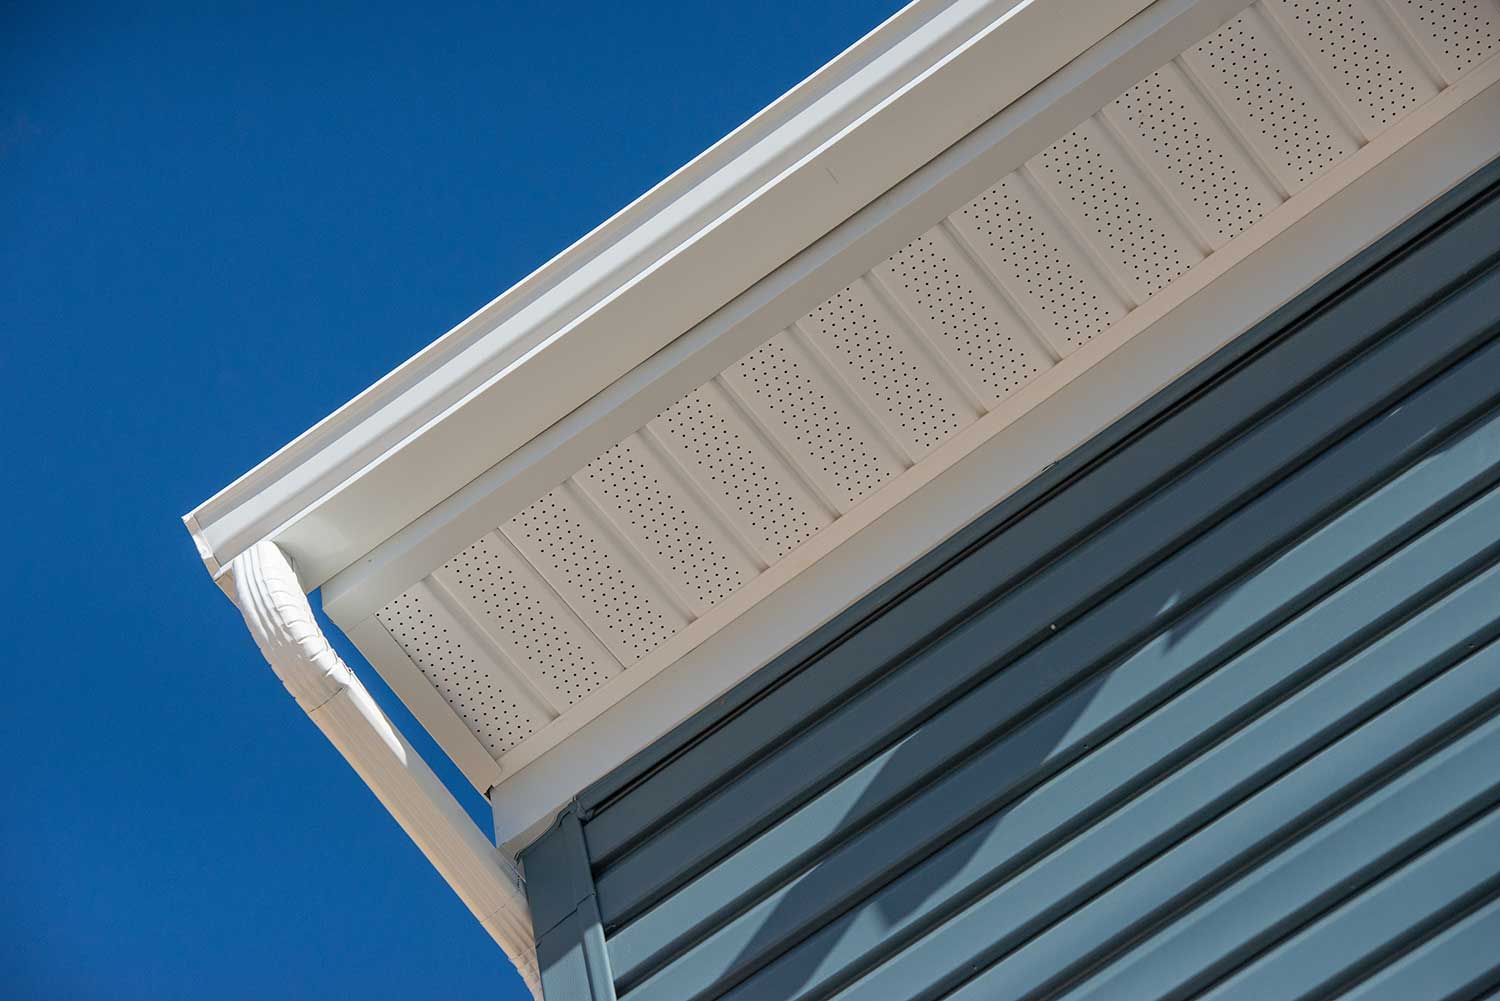 Colonial white gutter guard system, fascia, drip edge, soffit providing ventilation to the attic